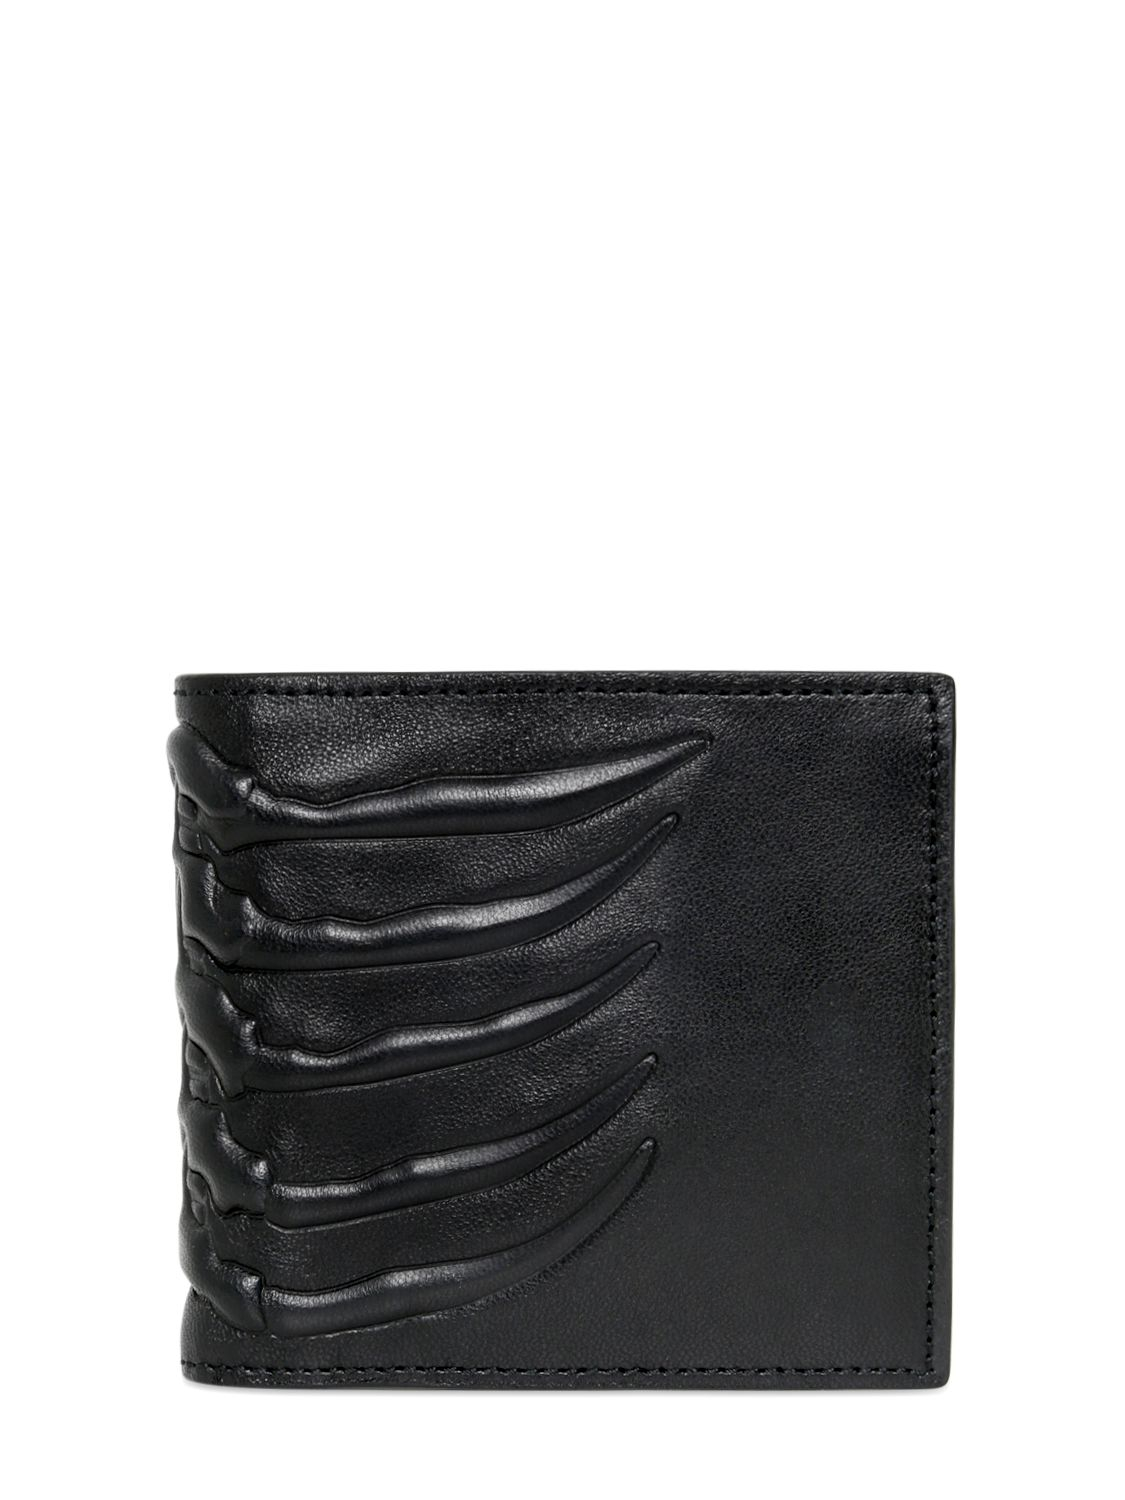 Lyst - Alexander Mcqueen Rib Cage Coin Pocket Leather Wallet in Black ...